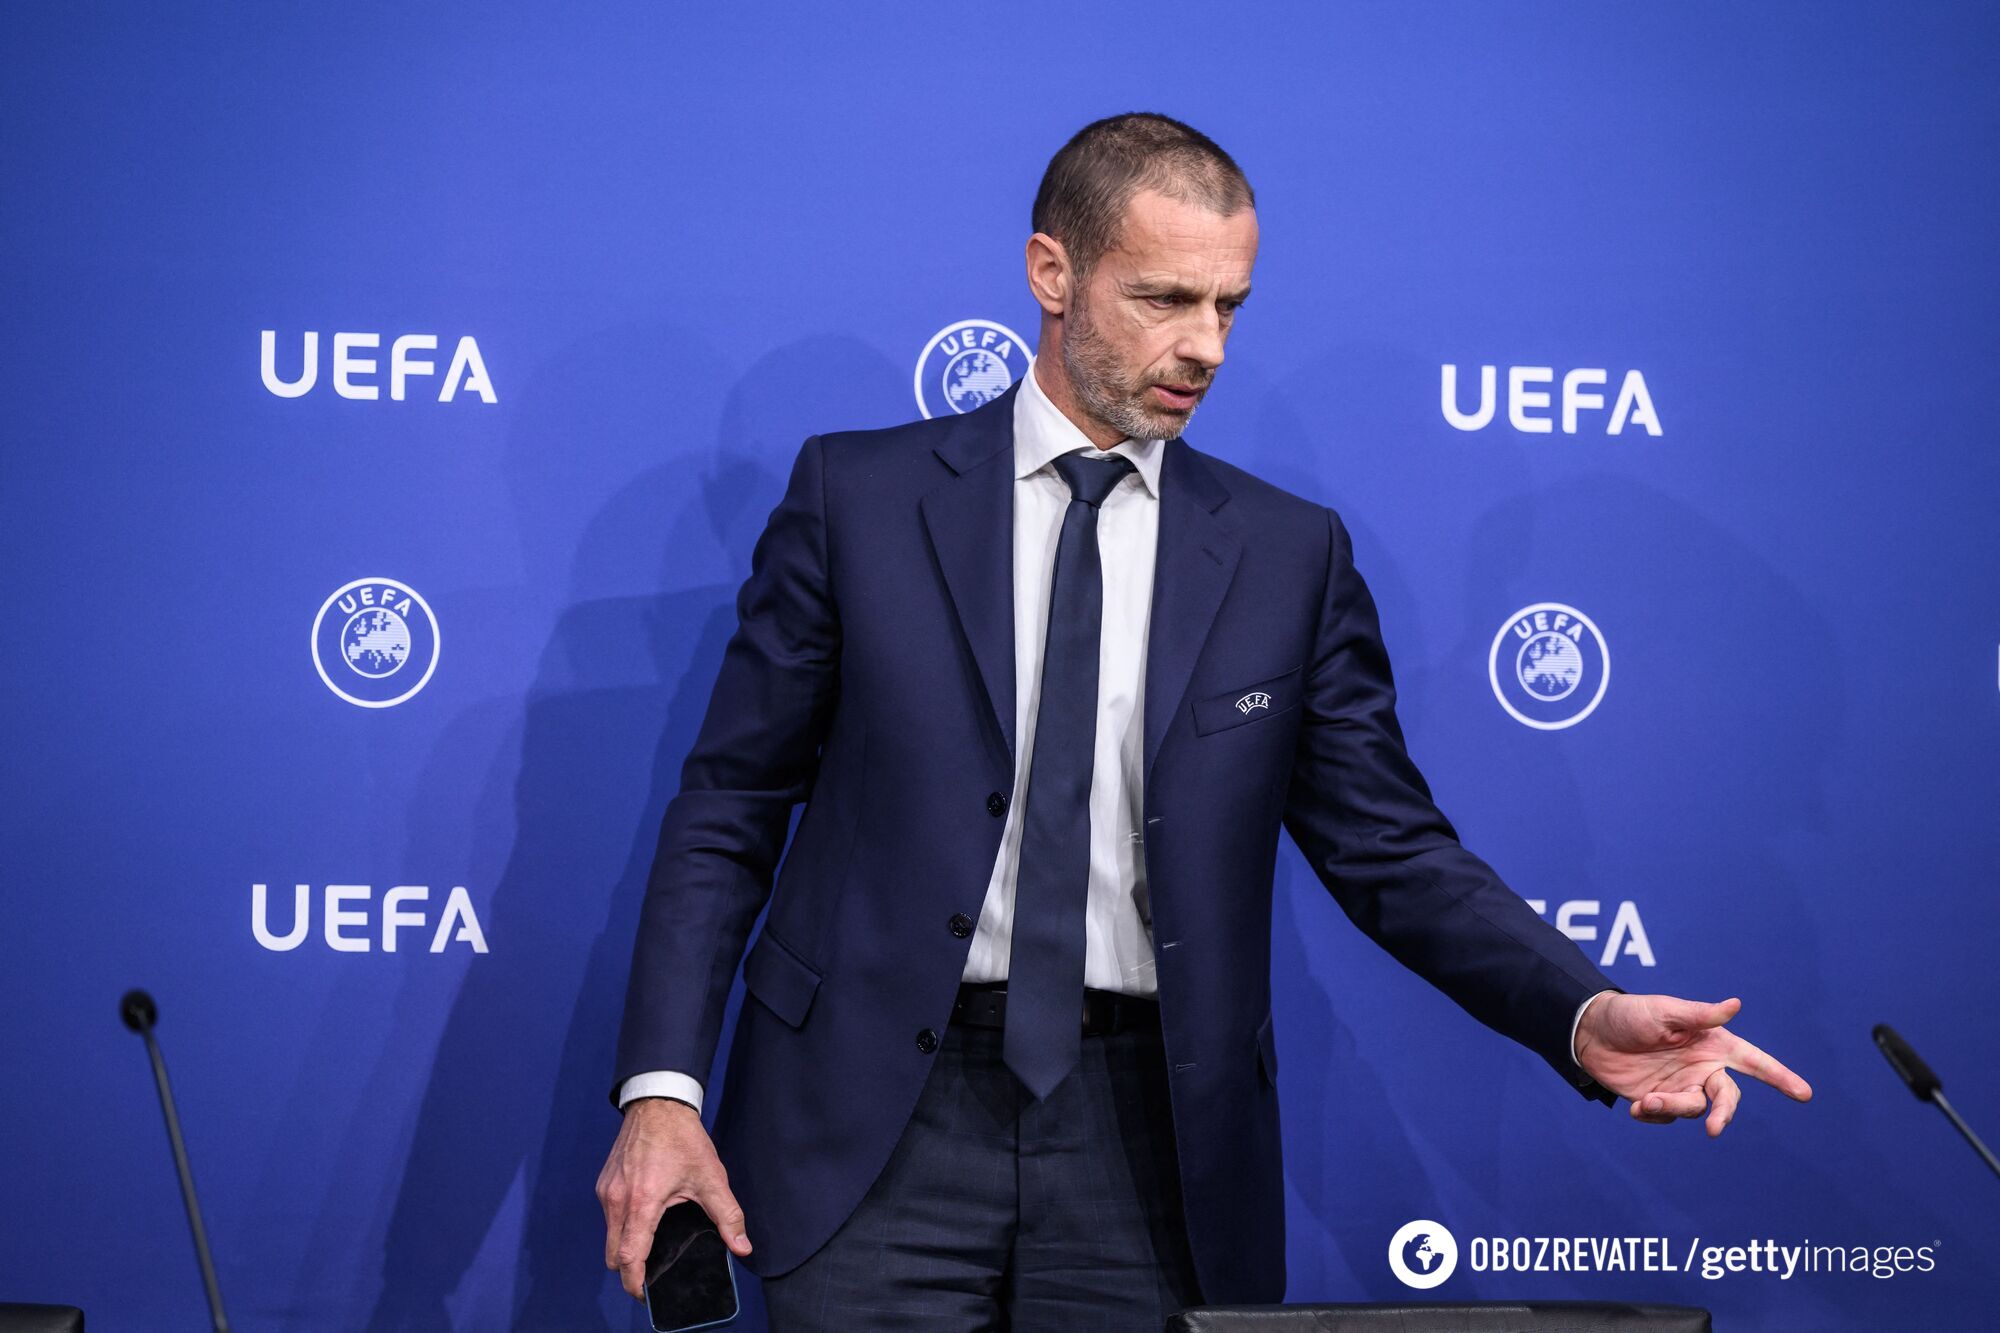 UEFA commented on the return of the Russian national team to international football